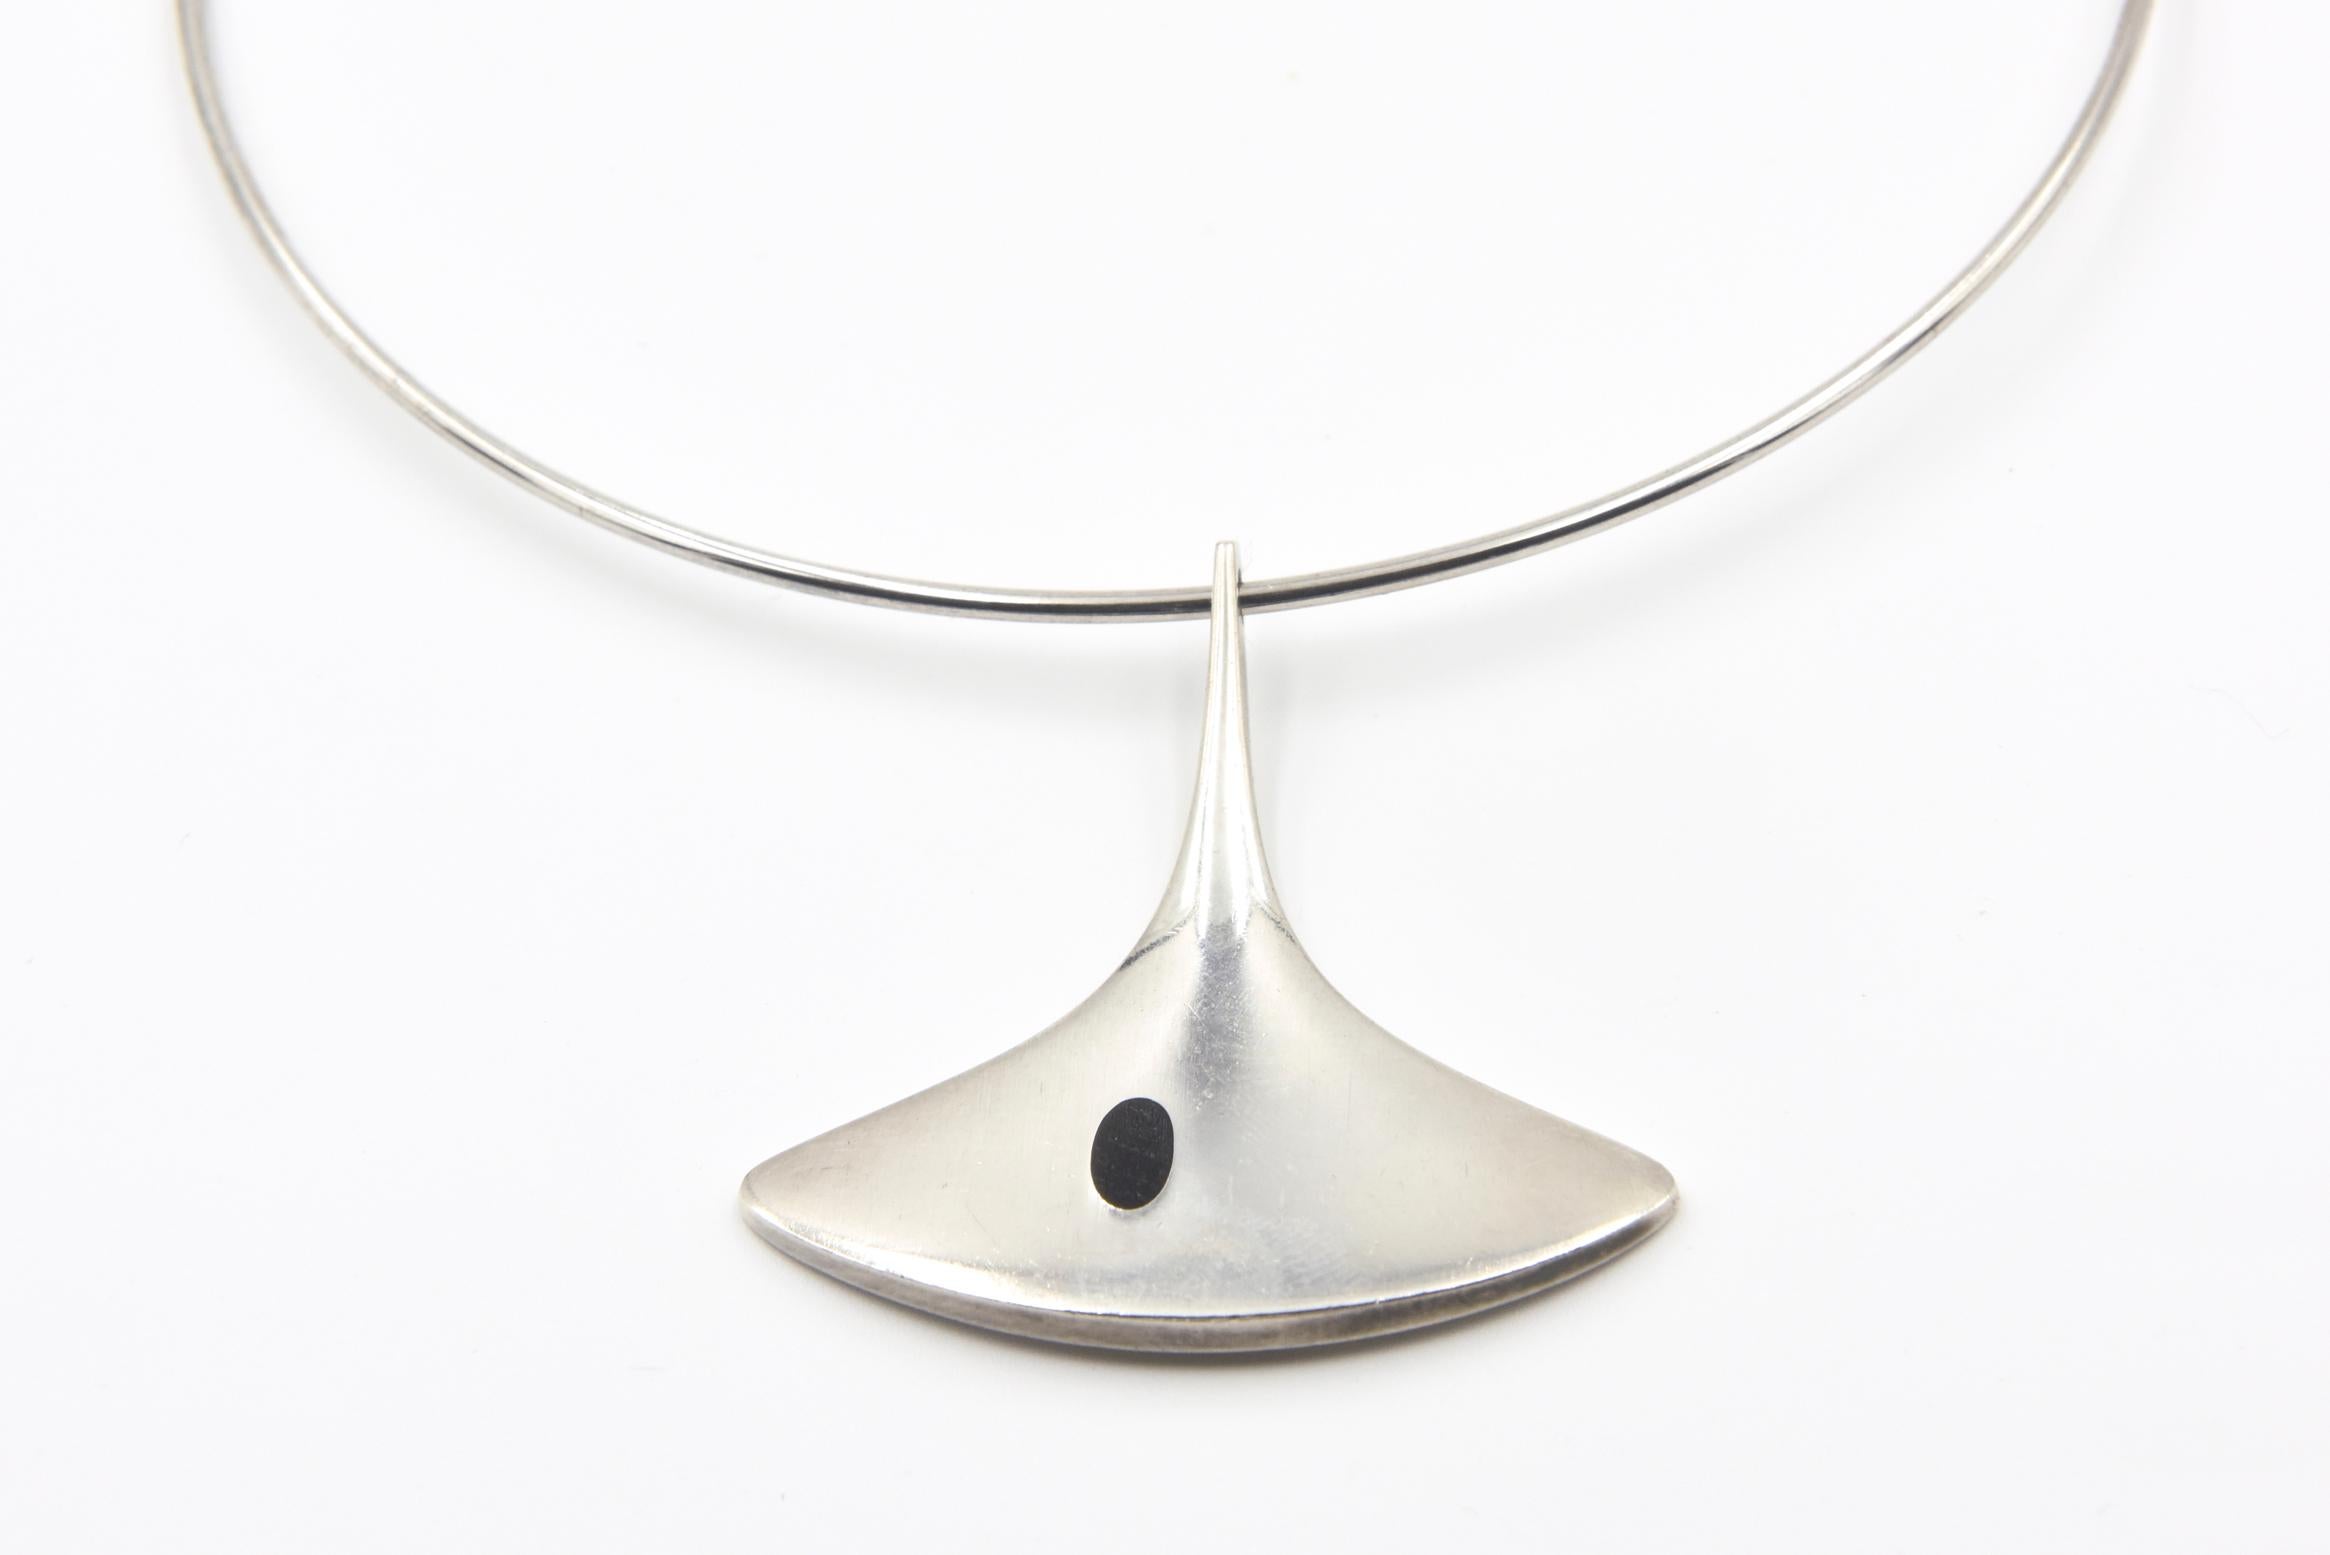 Modernist sterling silver pendant necklace designed by Karl Gustav as part of his 